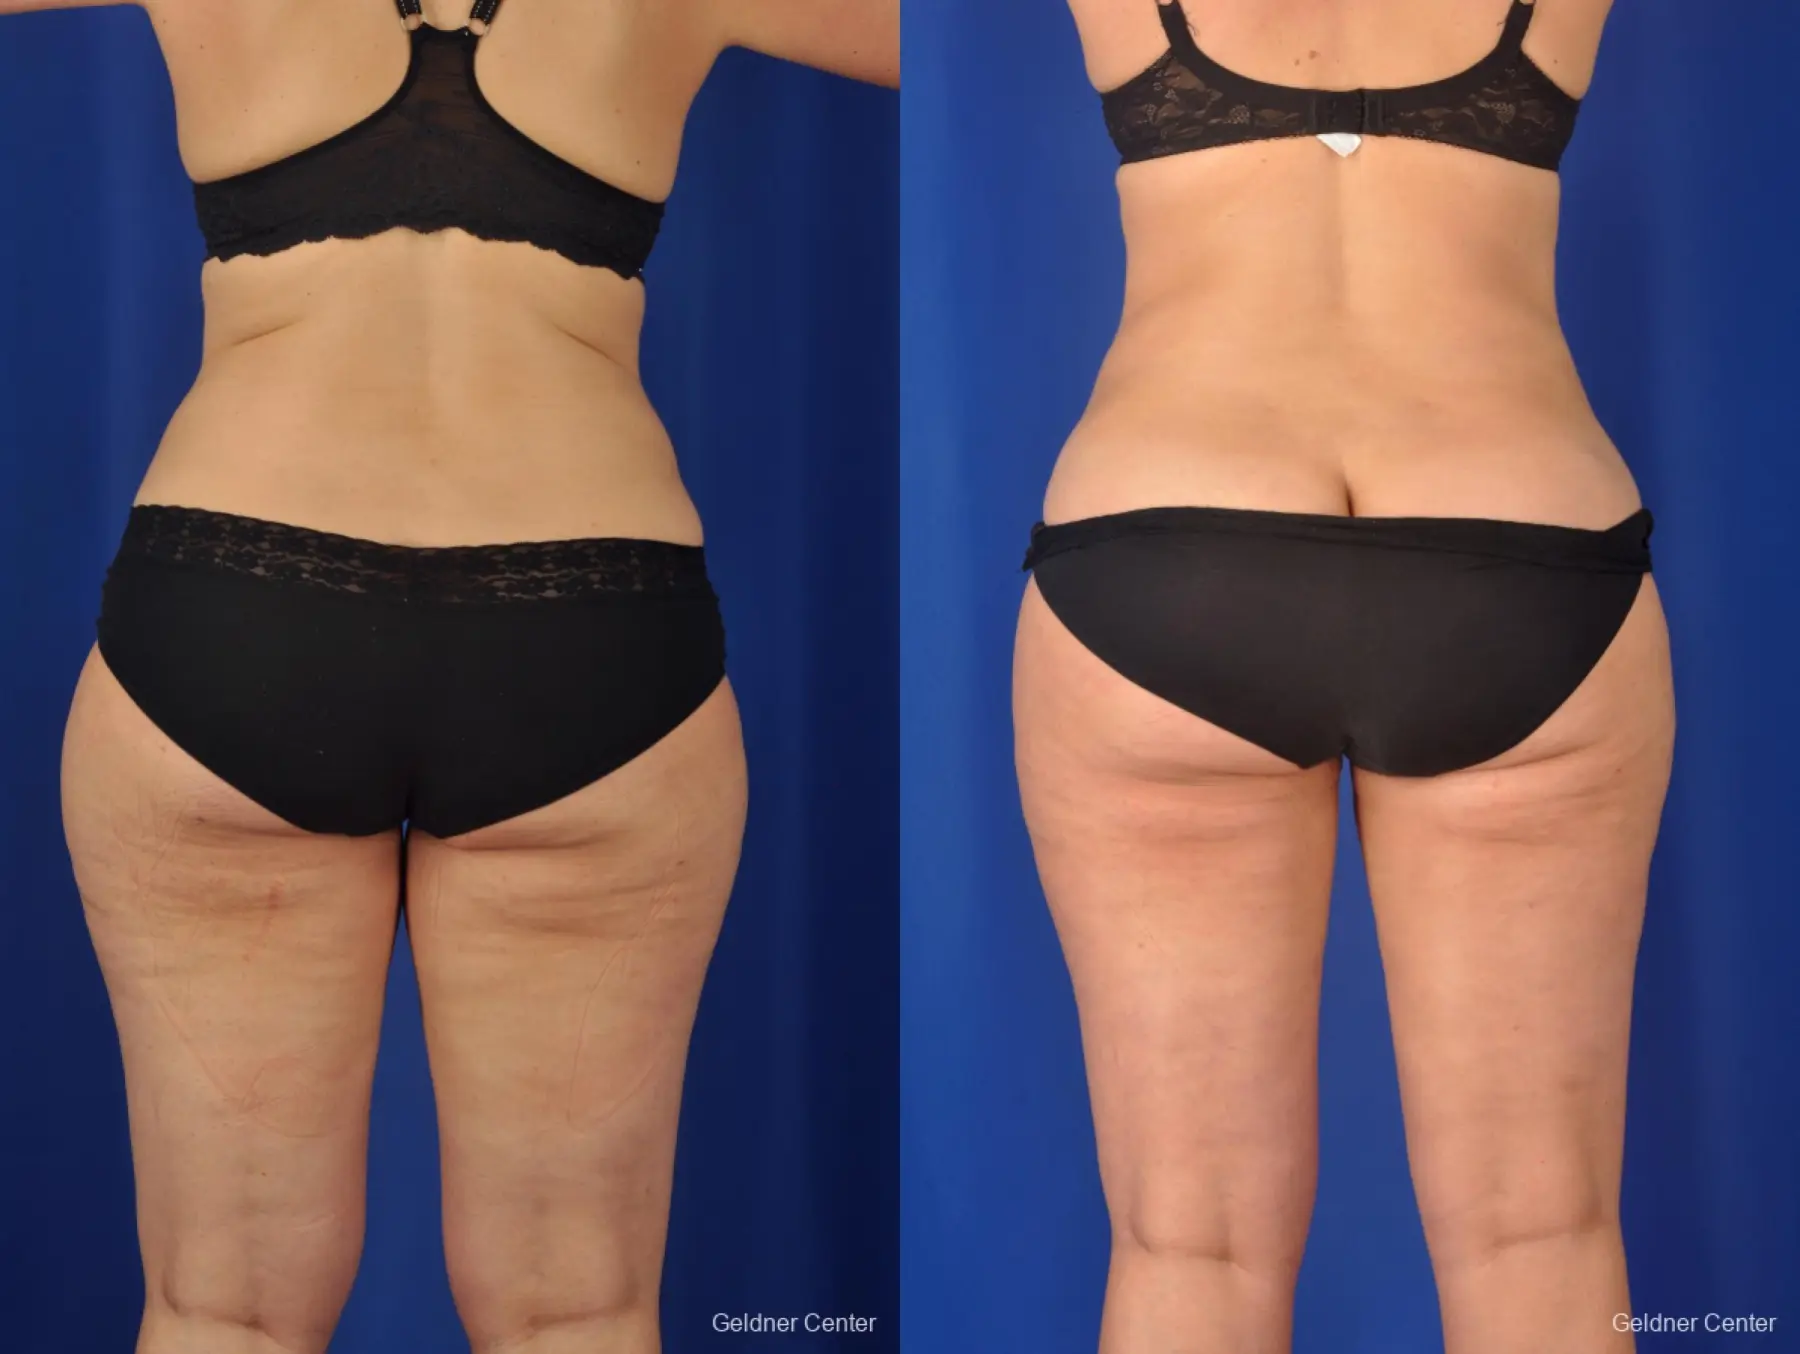 Liposuction: Patient 2 - Before and After 4